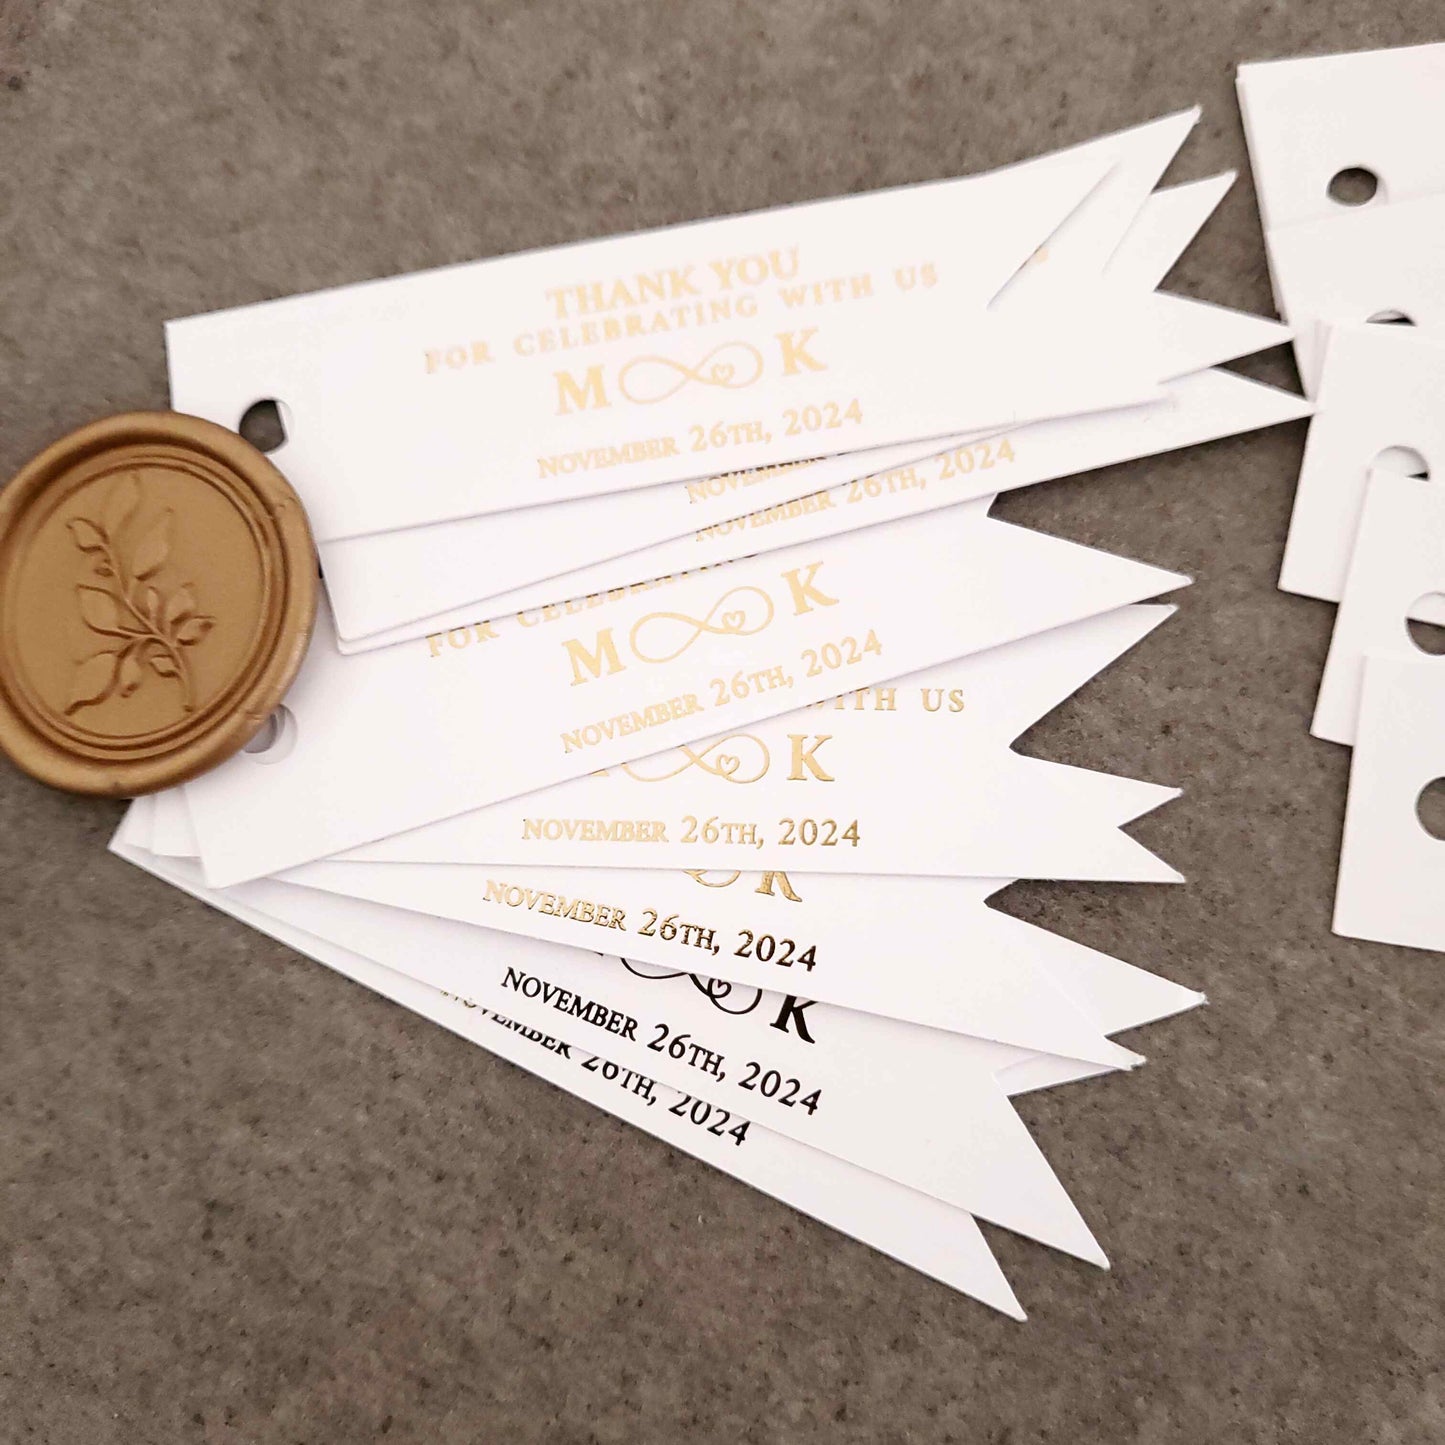 Personalized thank you for celebrating with us wedding favor tags with foiled text, including the couple's initials, an infinity sign and the wedding date.